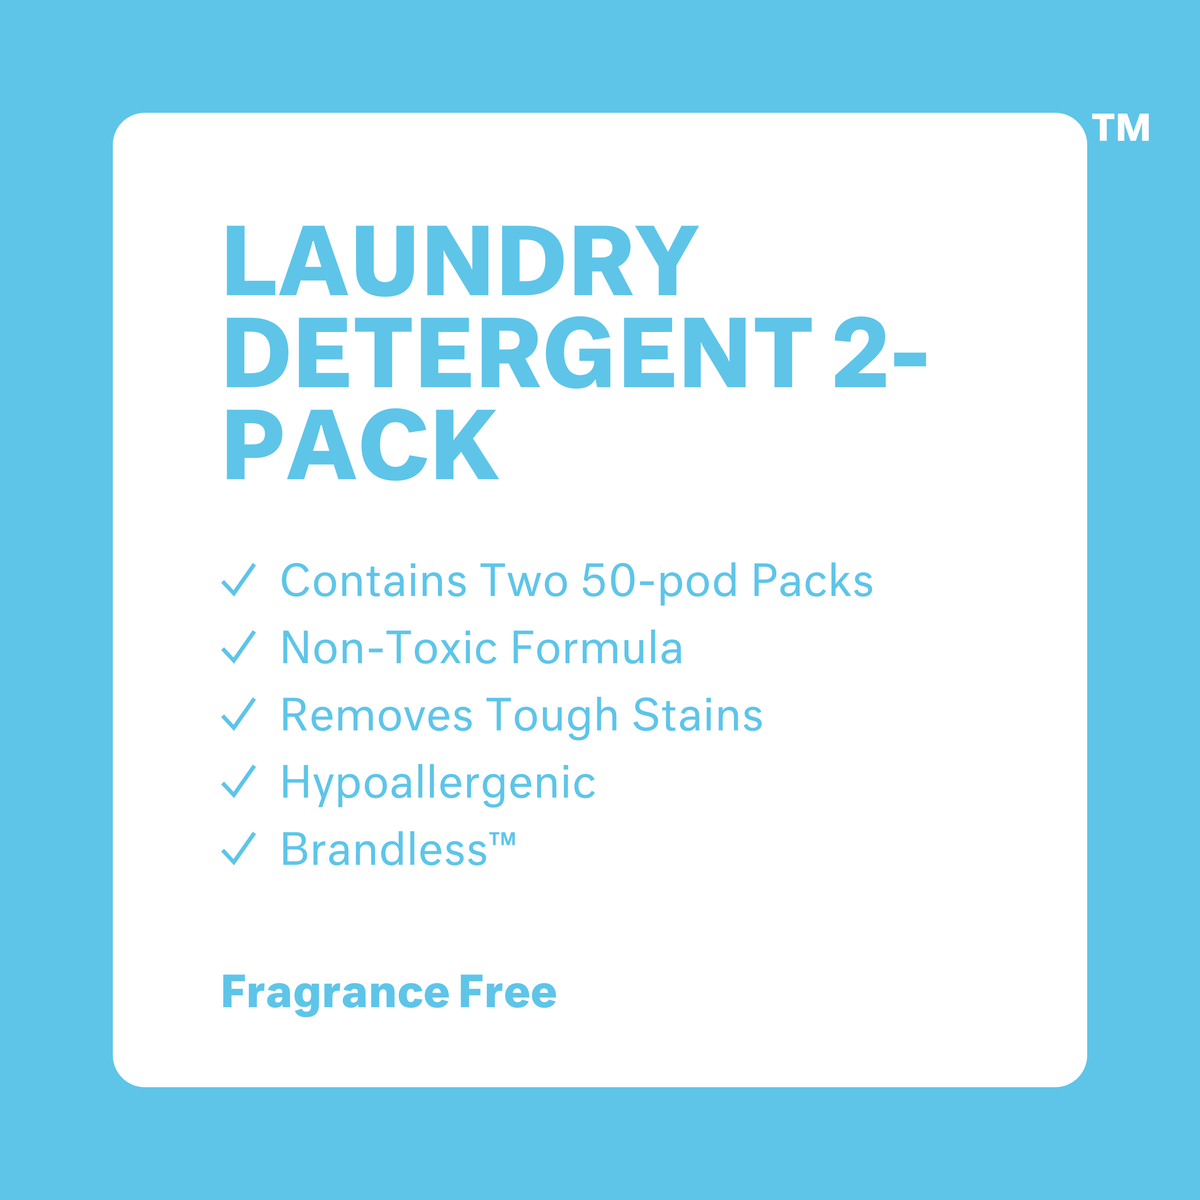 Laundry Detergent 2-Packs: Fragrance Free. Contains 50 packs. Non-toxic formula. Removes tough stains. Hypoallergenic. Brandless.